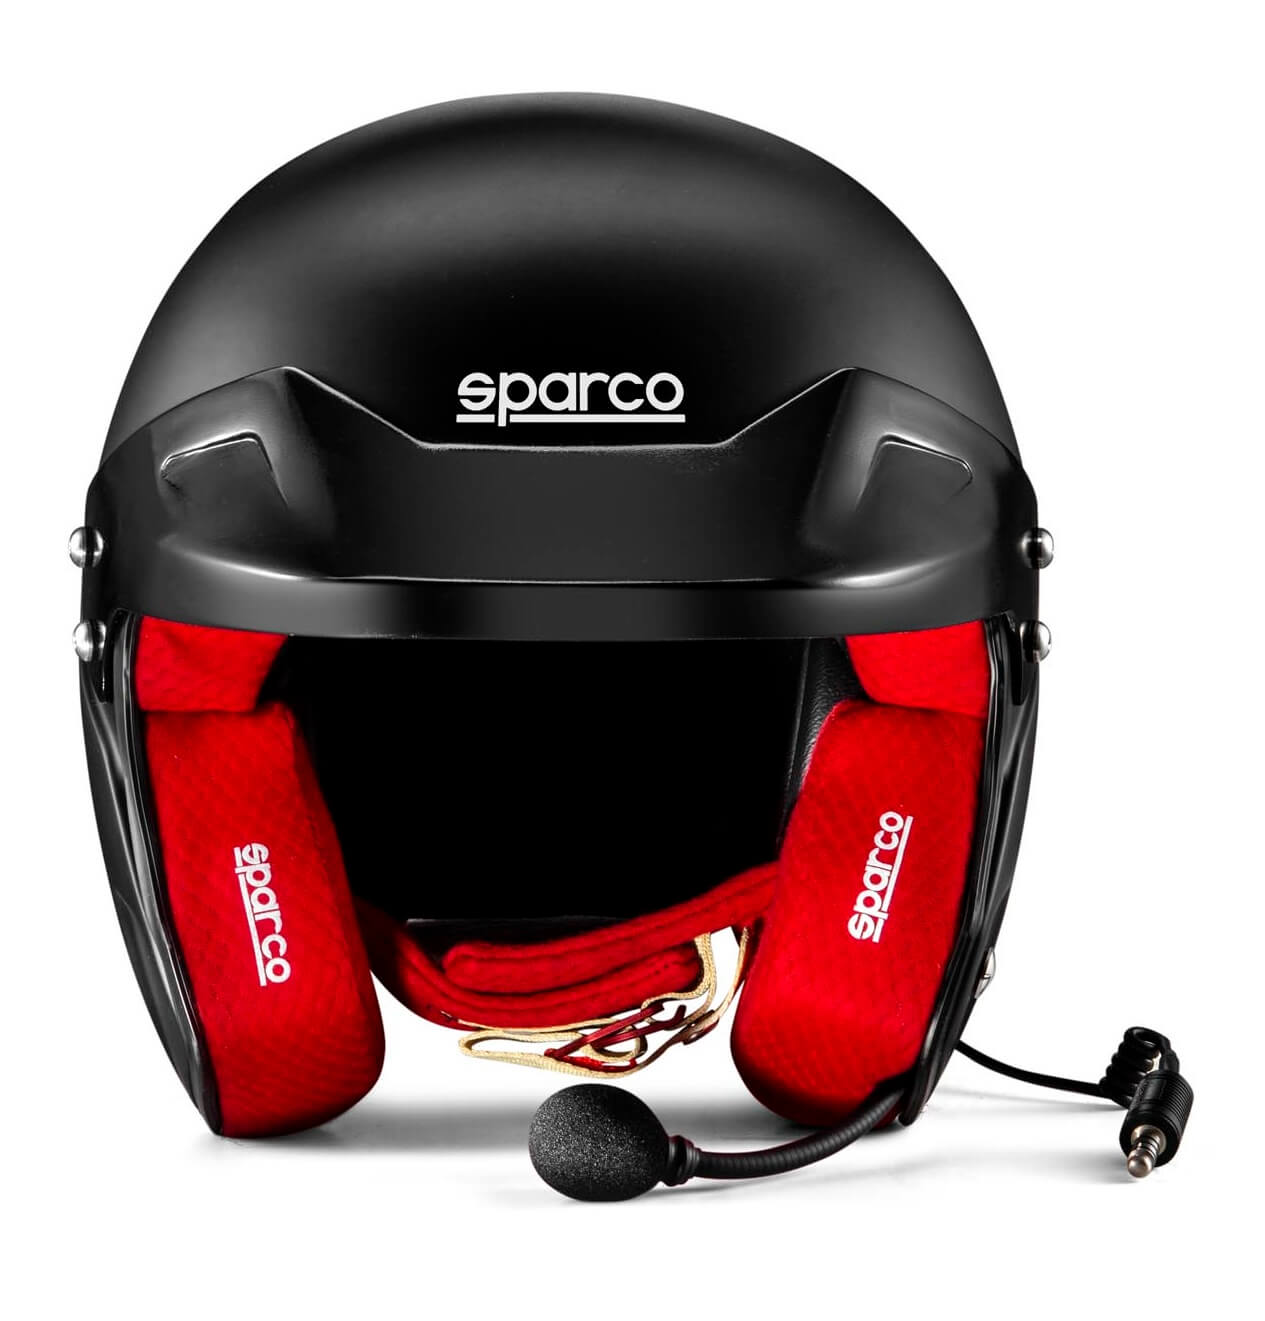 SPARCO 003369NRRS2M RJ-i Racing helmet open-face, FIA/SNELL SA2020, black/red, size M (57-58) Photo-1 